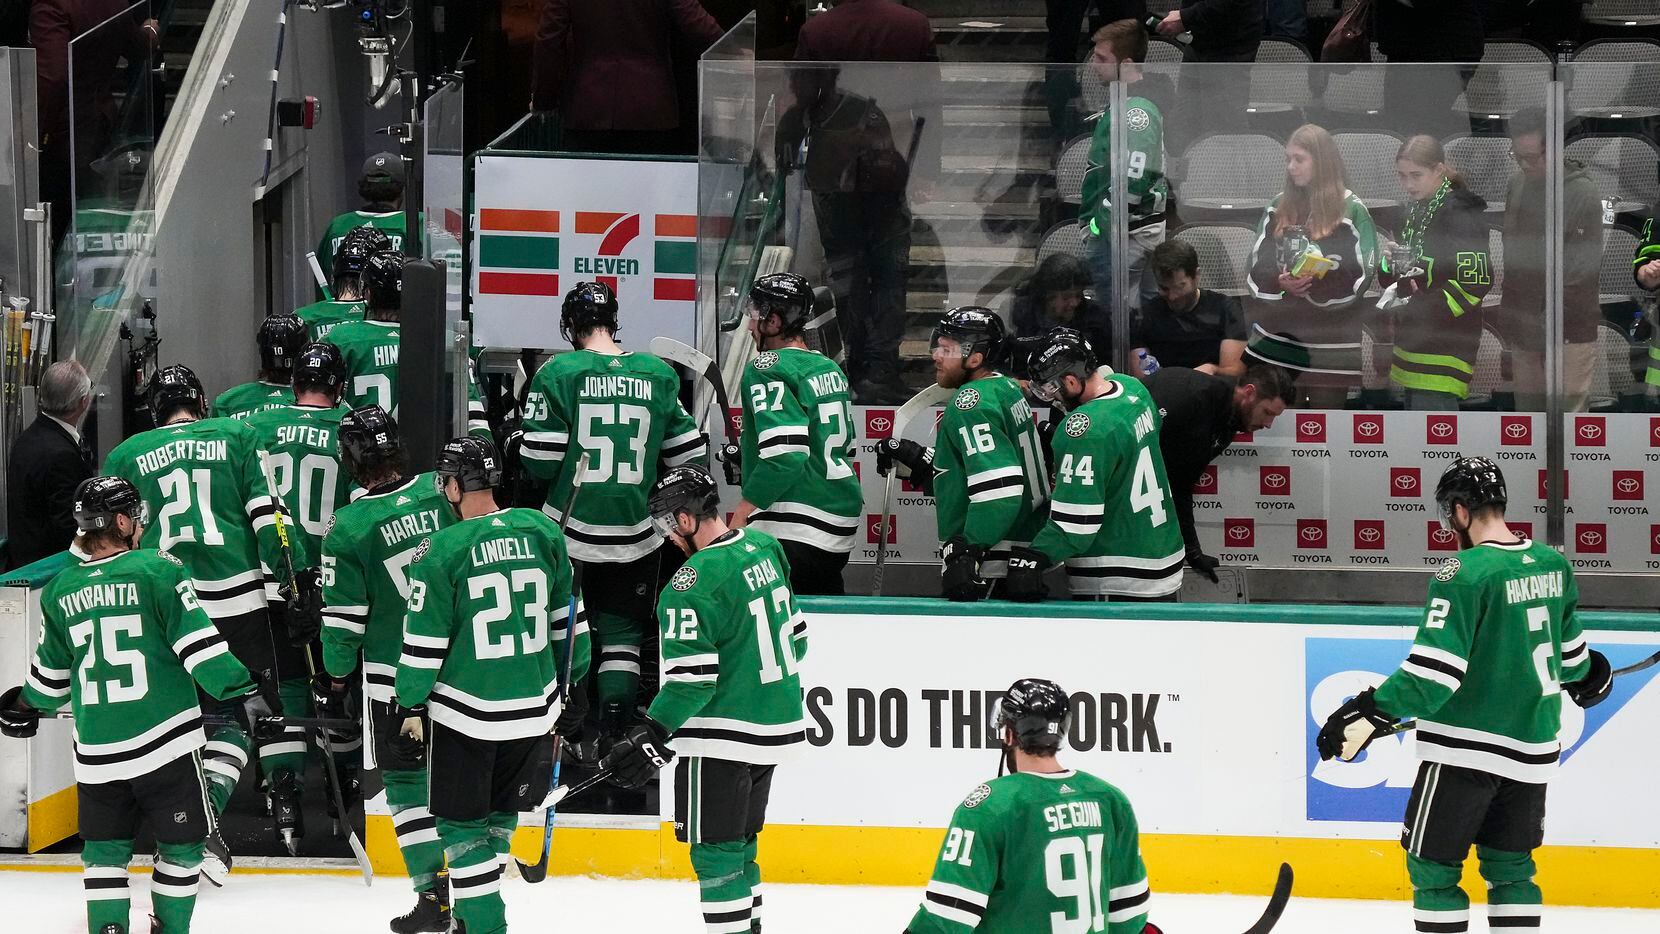 Where do Stars go following another loss to Golden Knights? NHL history says summer break